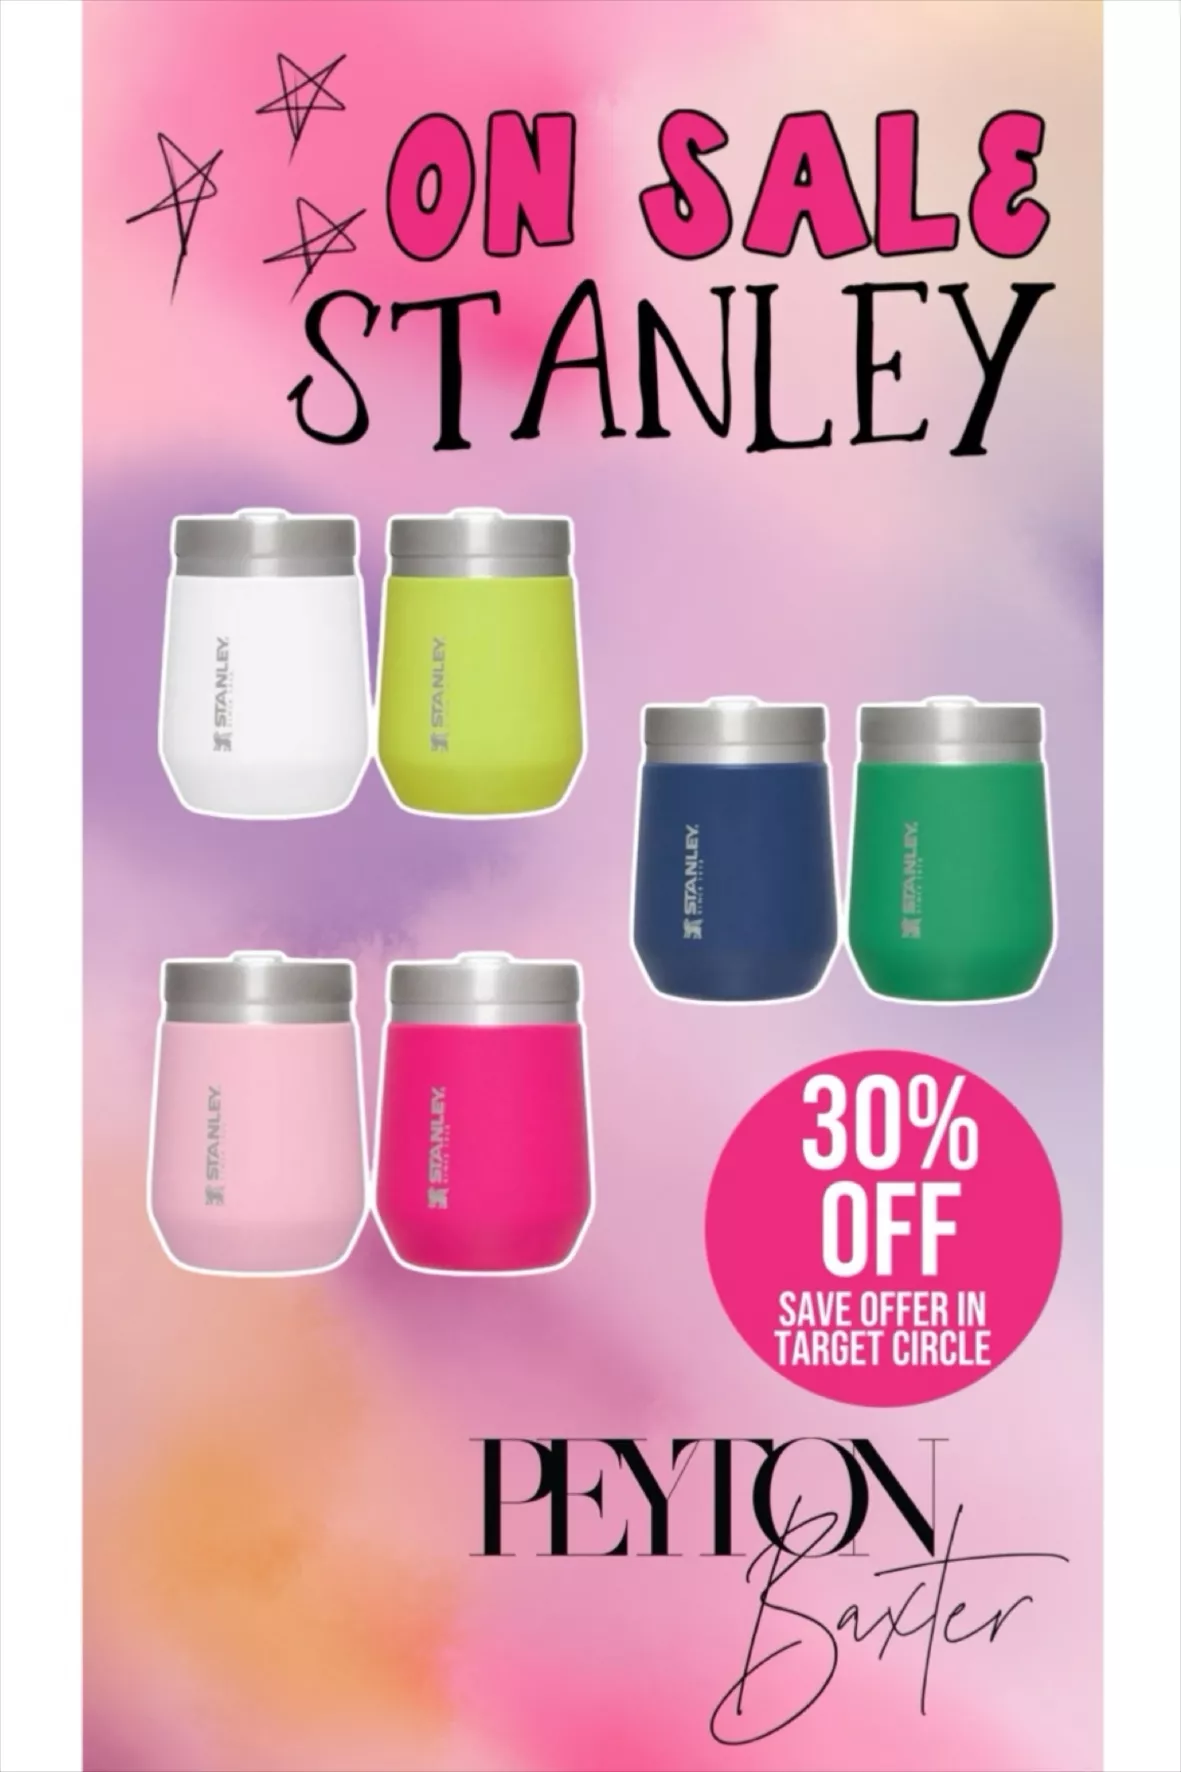 Stanley 2pk 10oz Stainless Steel Everyday Go Tumbler - Pink Vibes